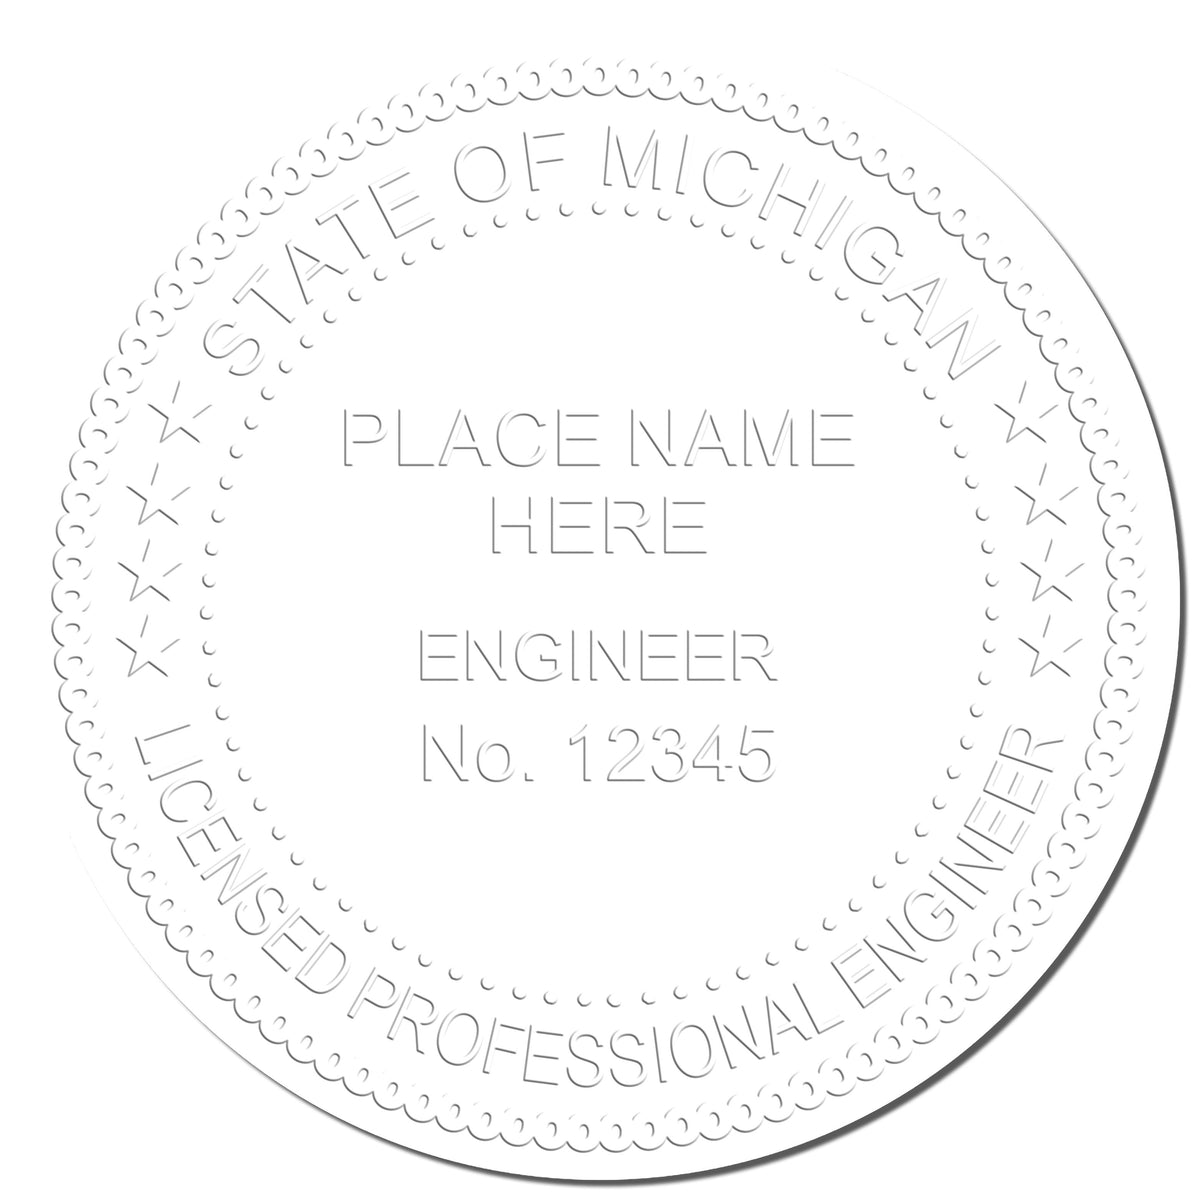 The Soft Michigan Professional Engineer Seal stamp impression comes to life with a crisp, detailed photo on paper - showcasing true professional quality.